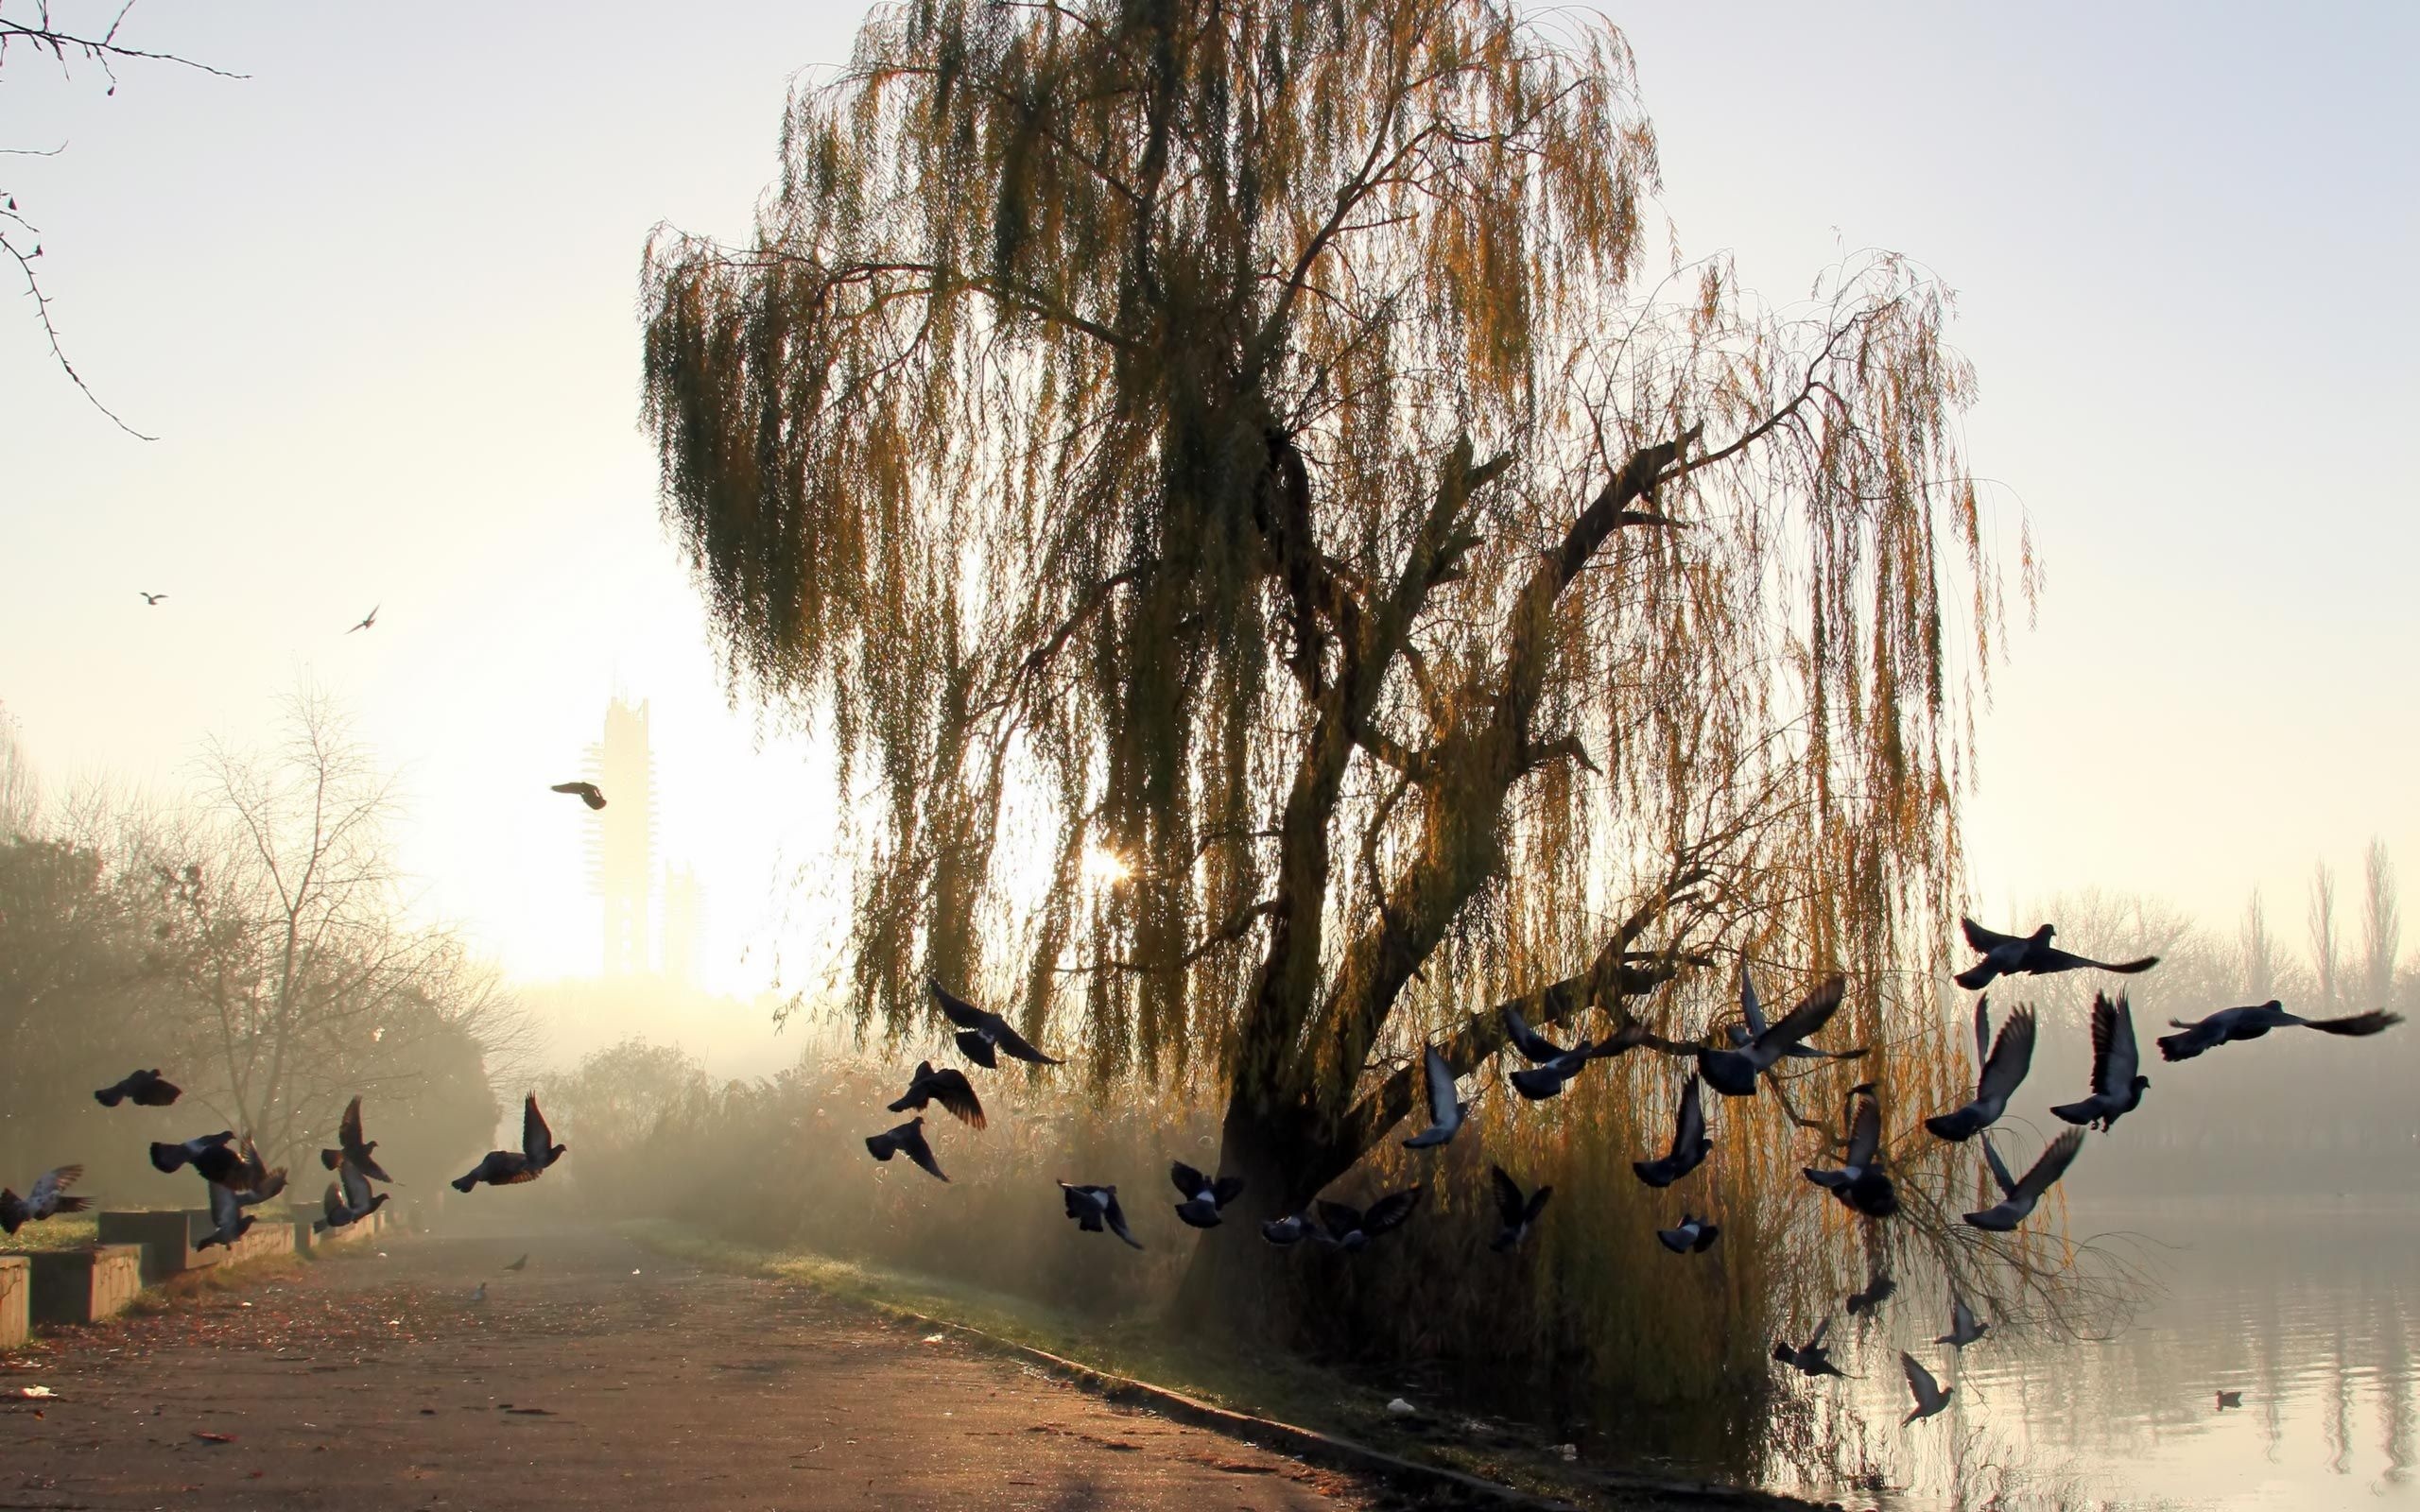 Weeping willow by the pond, Nature's tranquility, Serene beauty, Captivating atmosphere, 2560x1600 HD Desktop